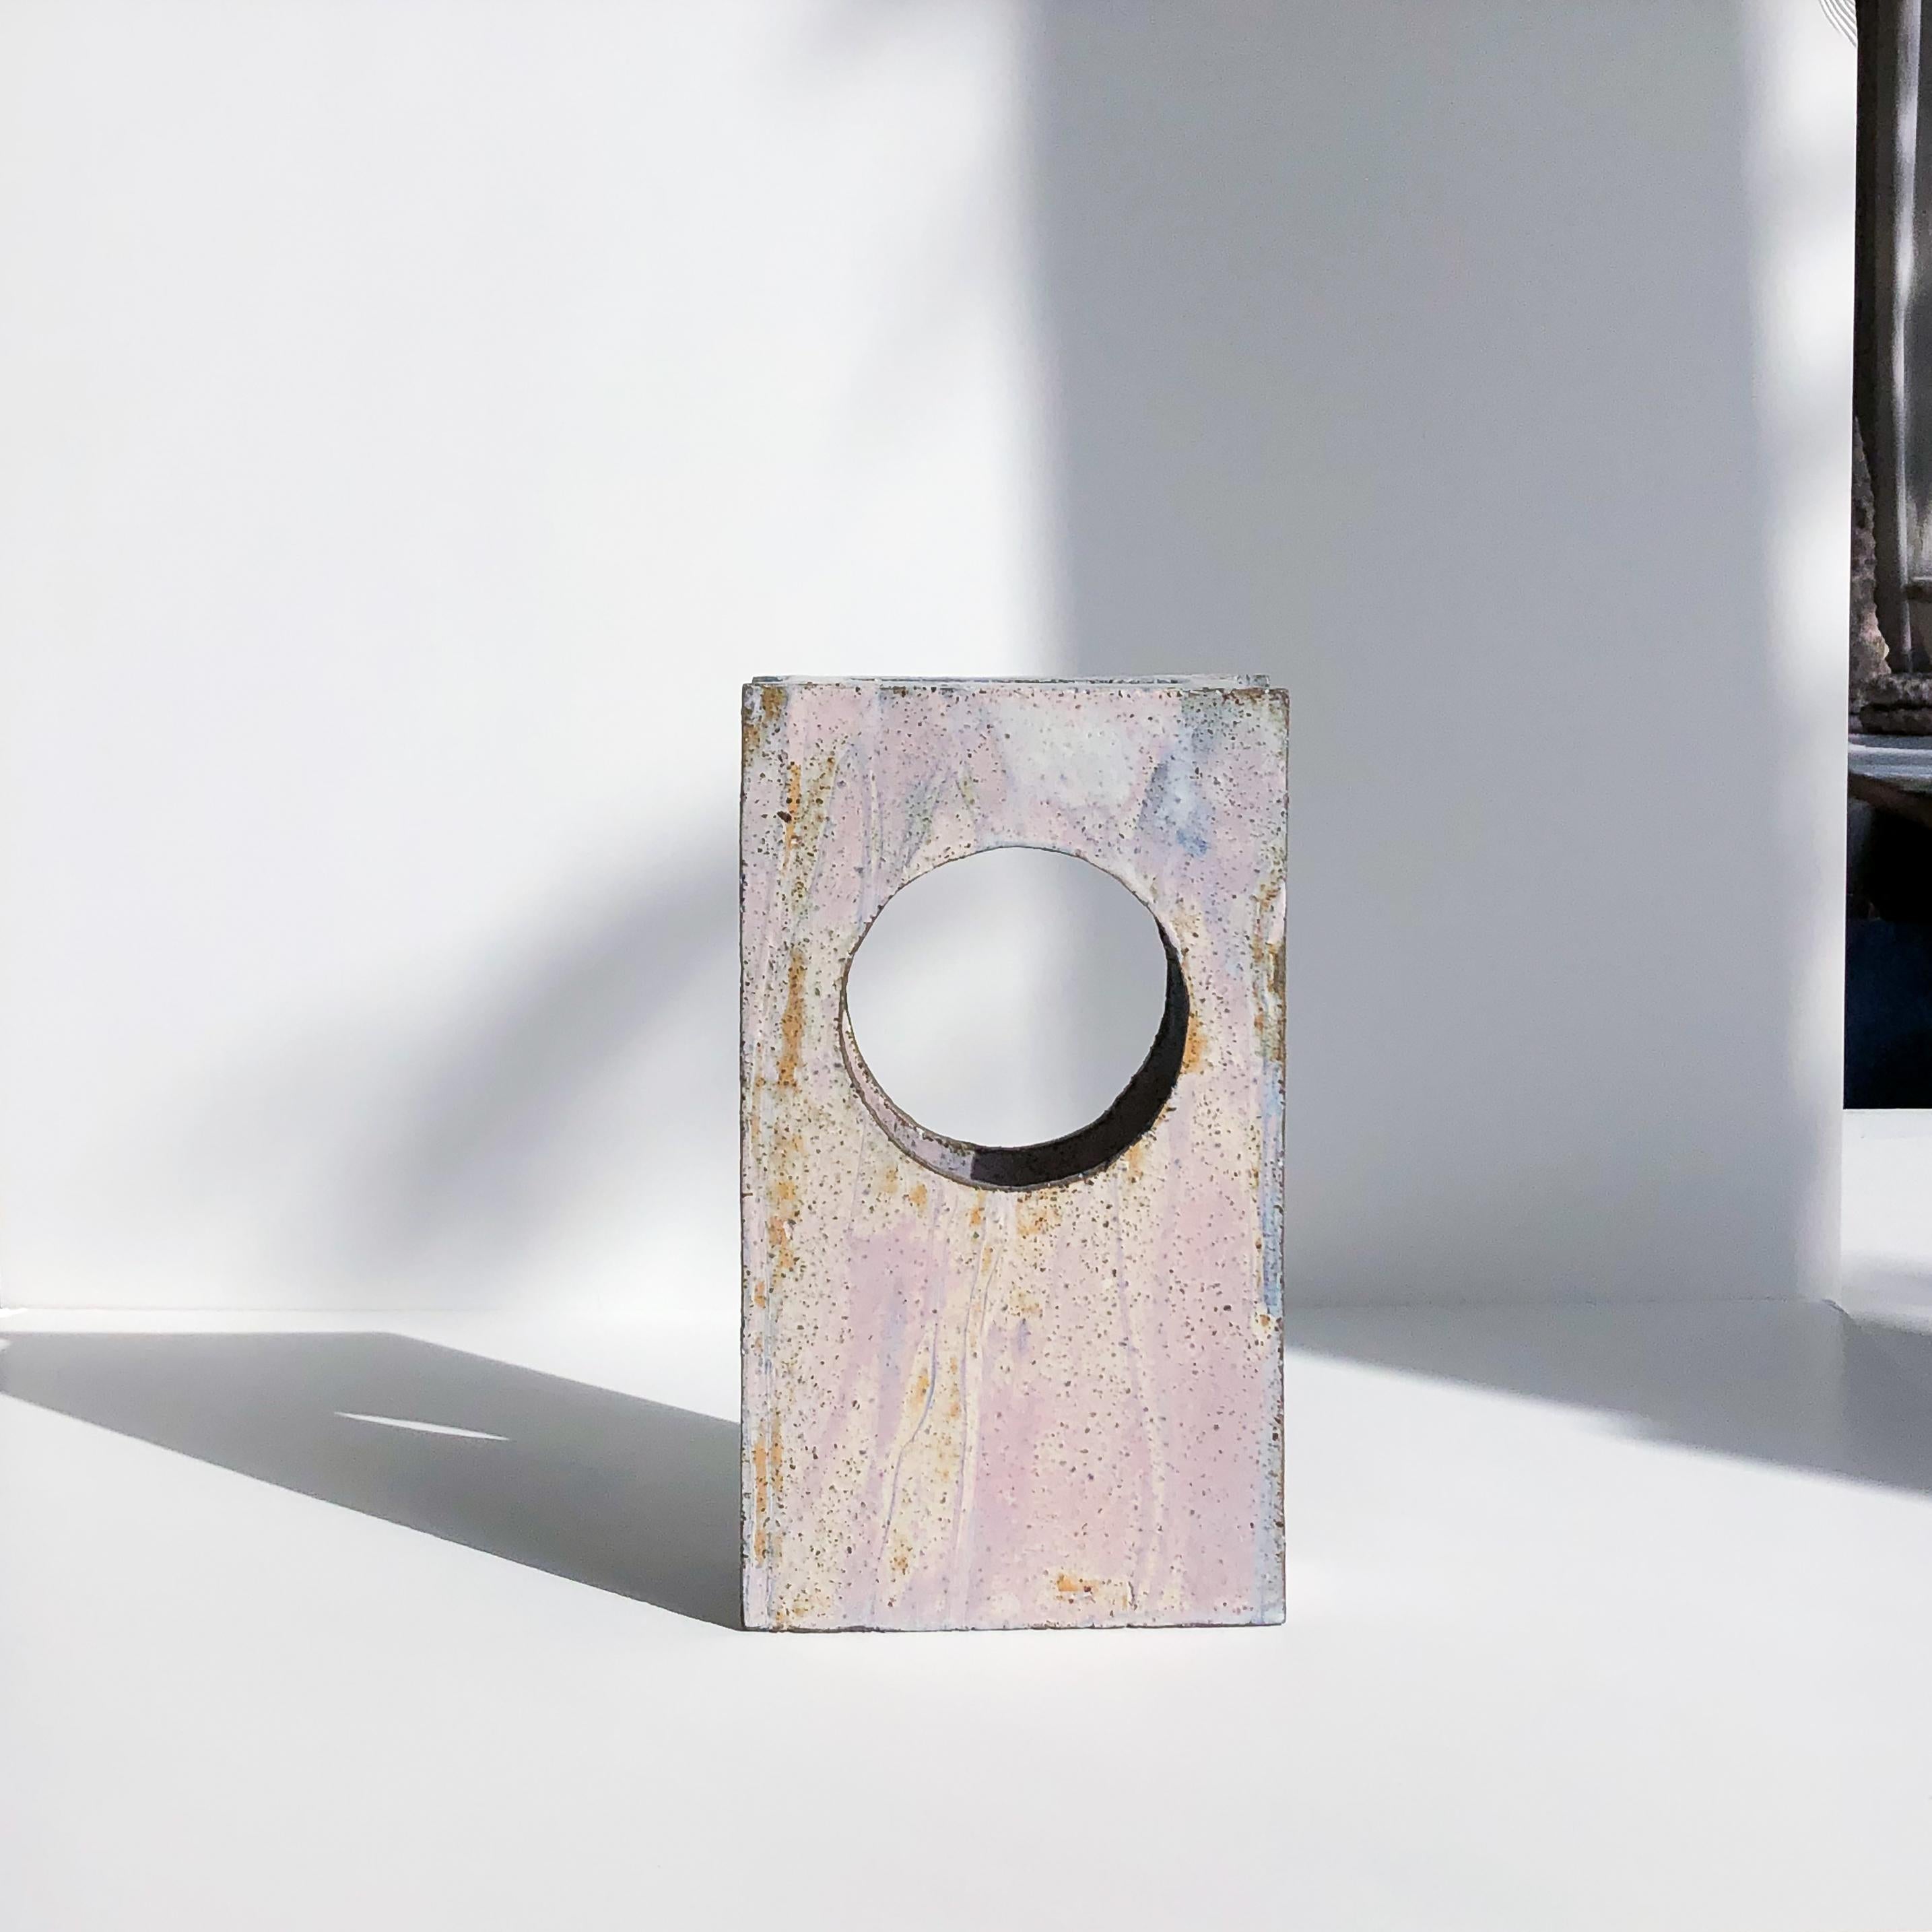 O vase I by Wendy Taylor
Dimensions: D15 x W5.5 x H26.5 cm
Materials: stoneware, glazed.
Glaze colour/ surface pattern will vary.

Wendy Taylor's clay slab constructed works are influenced by elements of the built environment, particularly the